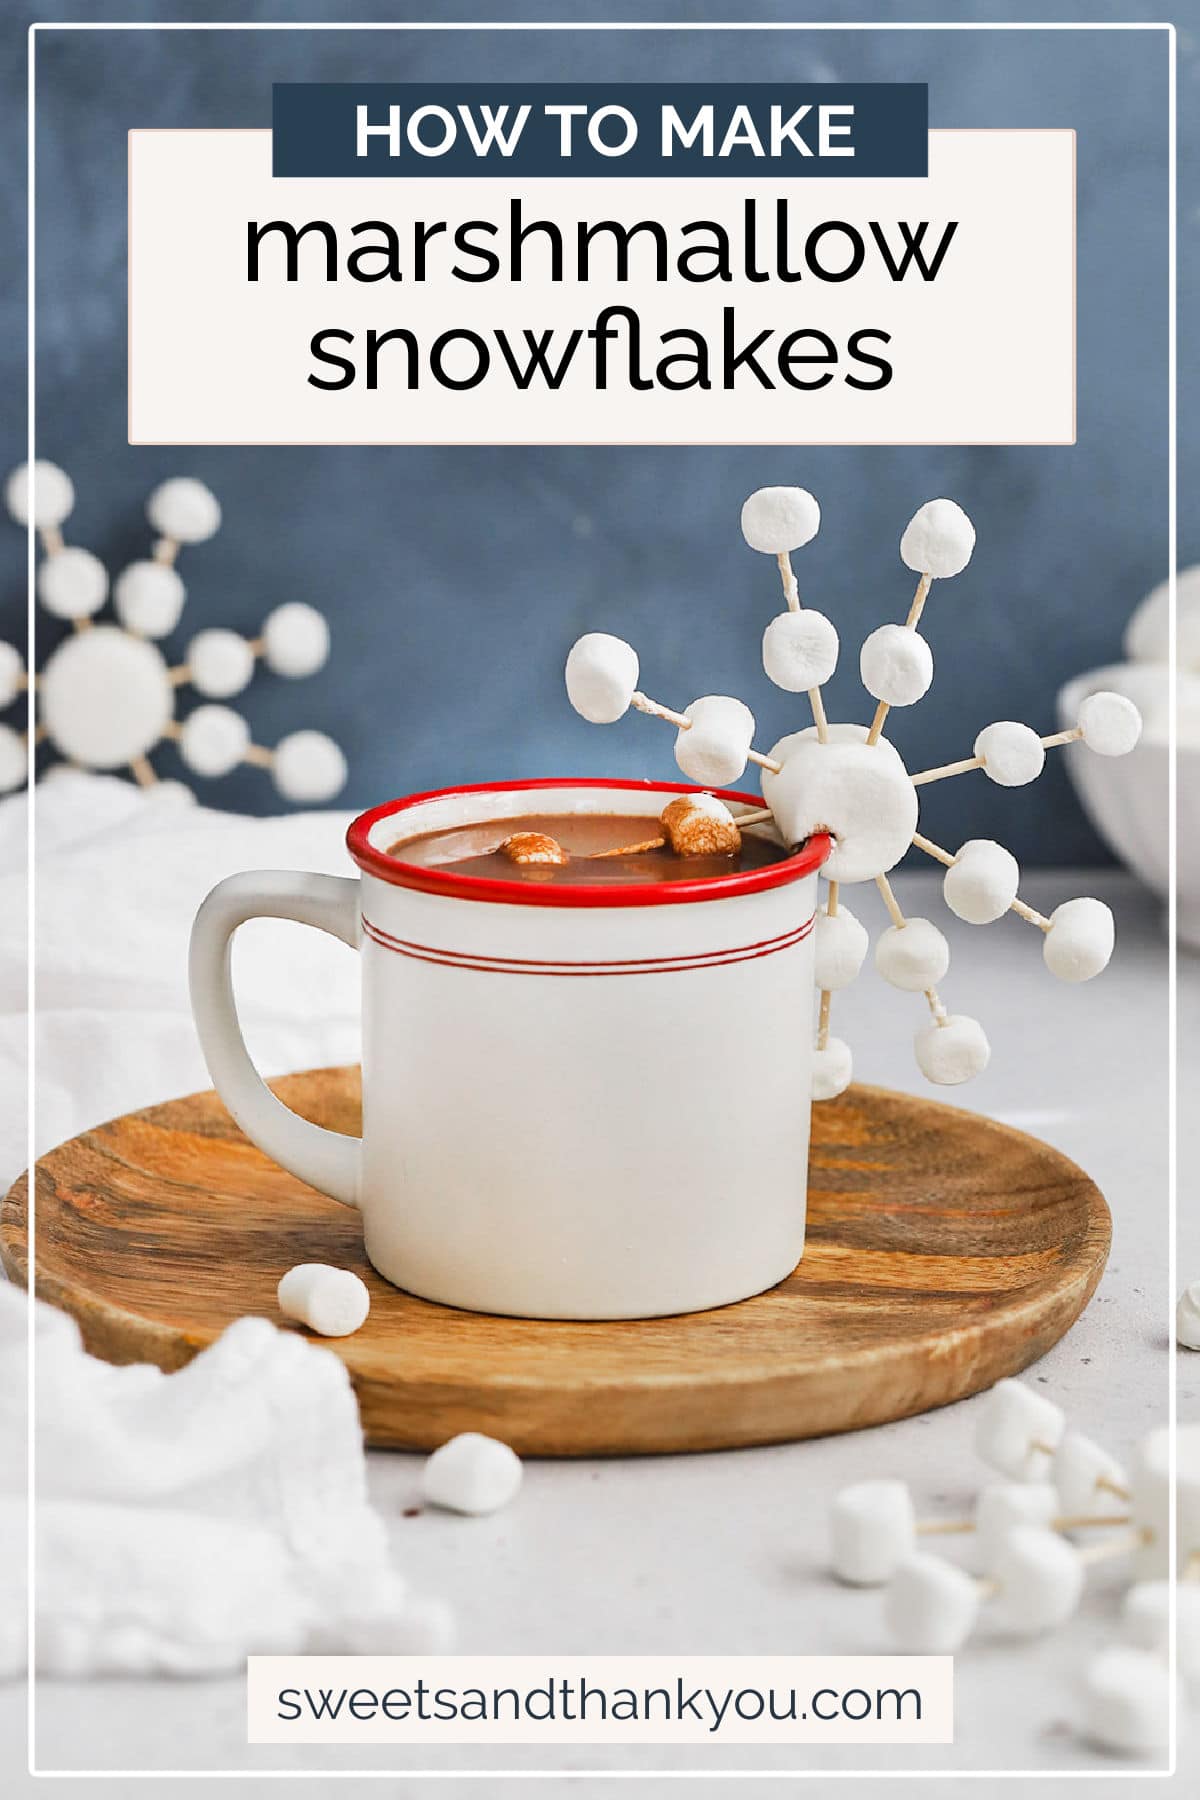 How To Make Marshmallow Snowflakes - Learn how to make marshmallow and toothpick snowflakes to decorate your next mug of hot cocoa! It only takes minutes & it's so fun! // marshmallow craft // hot chocolate topping // winter activity for kids // snow activity for kids // kids craft // marshmallow art // hot cocoa topping // gluten free recipe // snowflake STEM activity // winter STEM activity